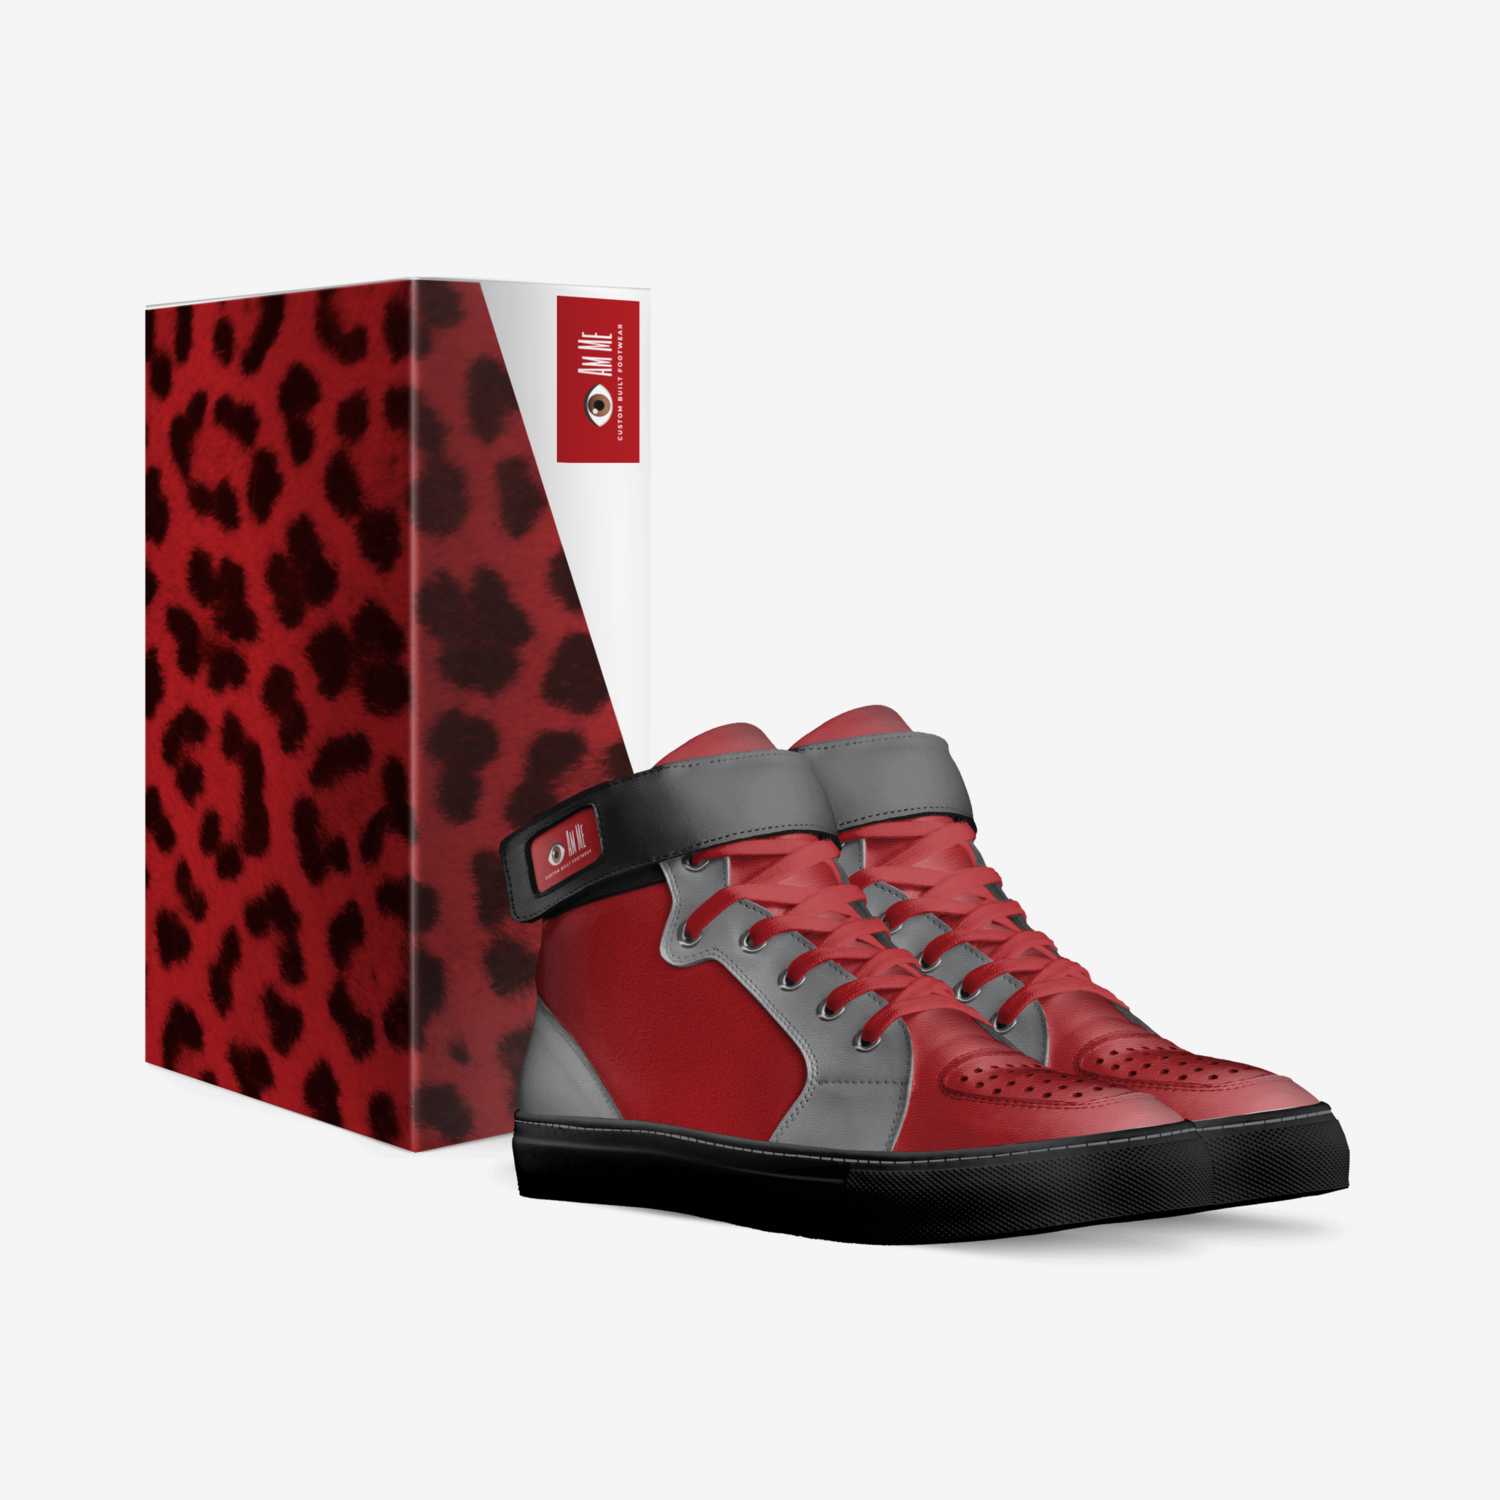 👁️AmMe custom made in Italy shoes by Royal Delray | Box view